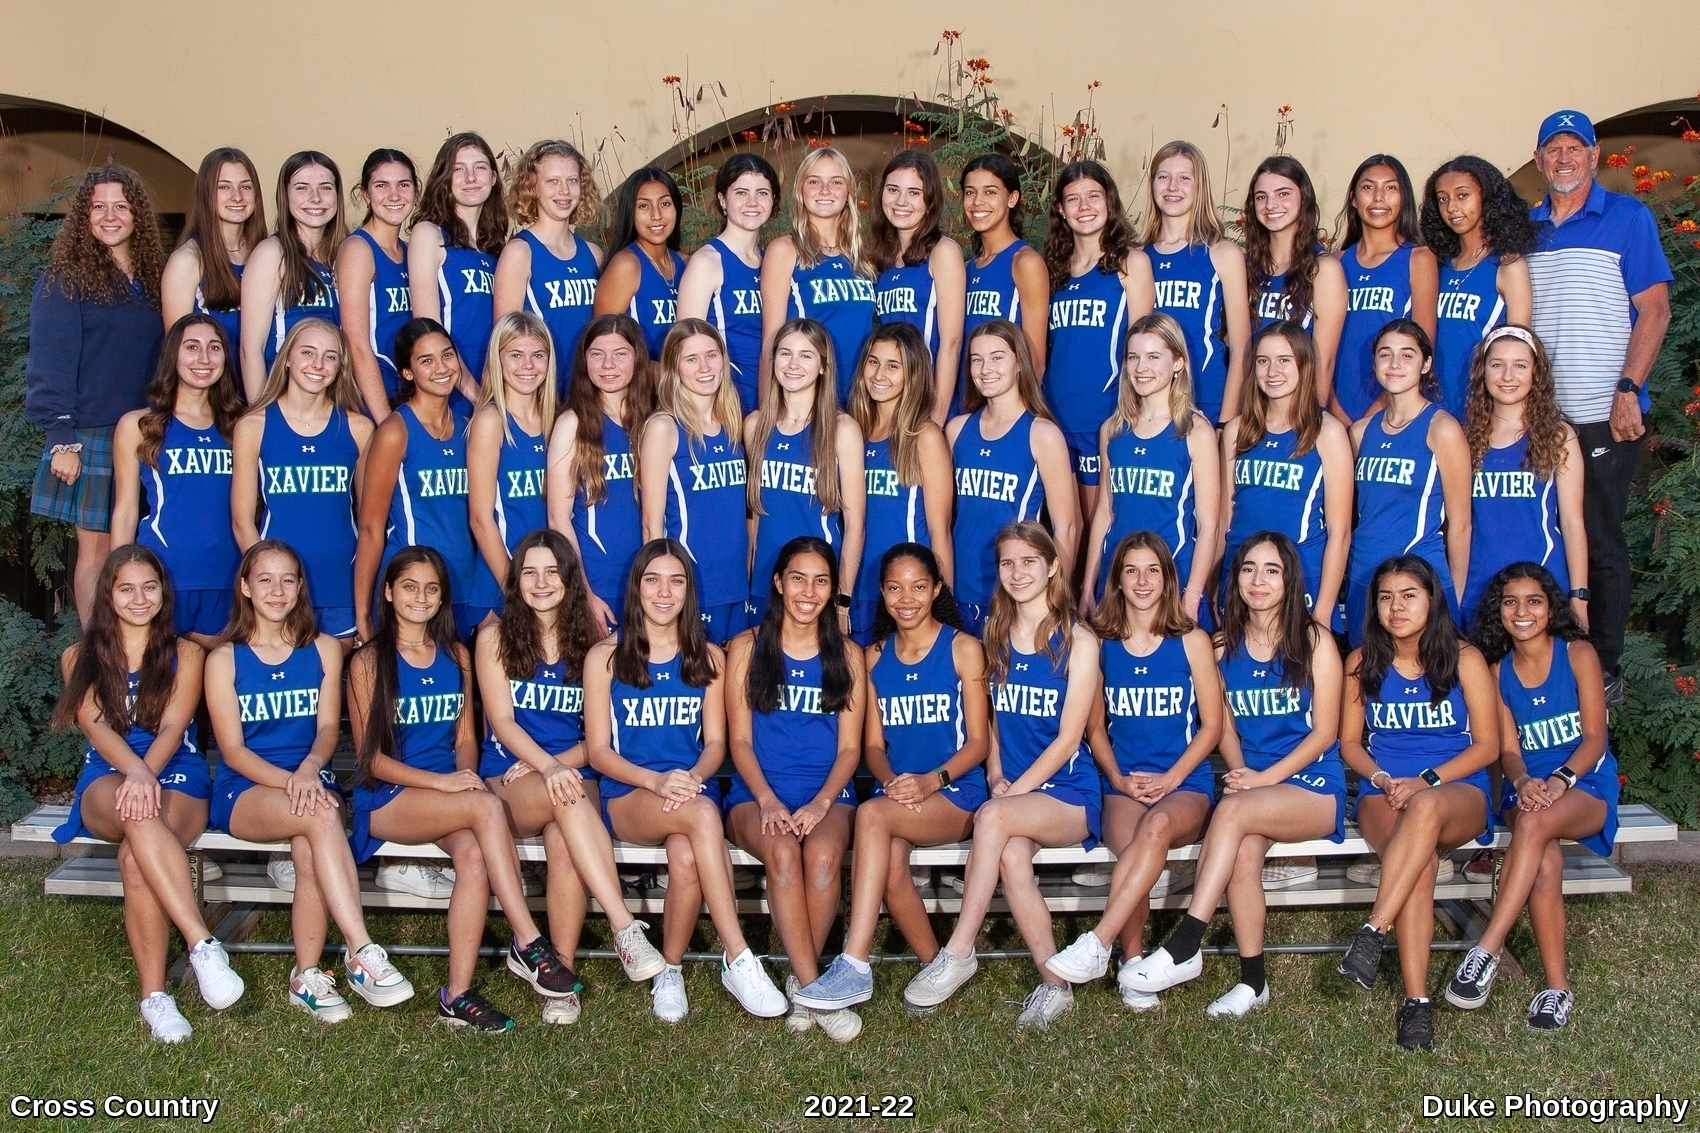 Cross Country Team pic 2021-22 for website